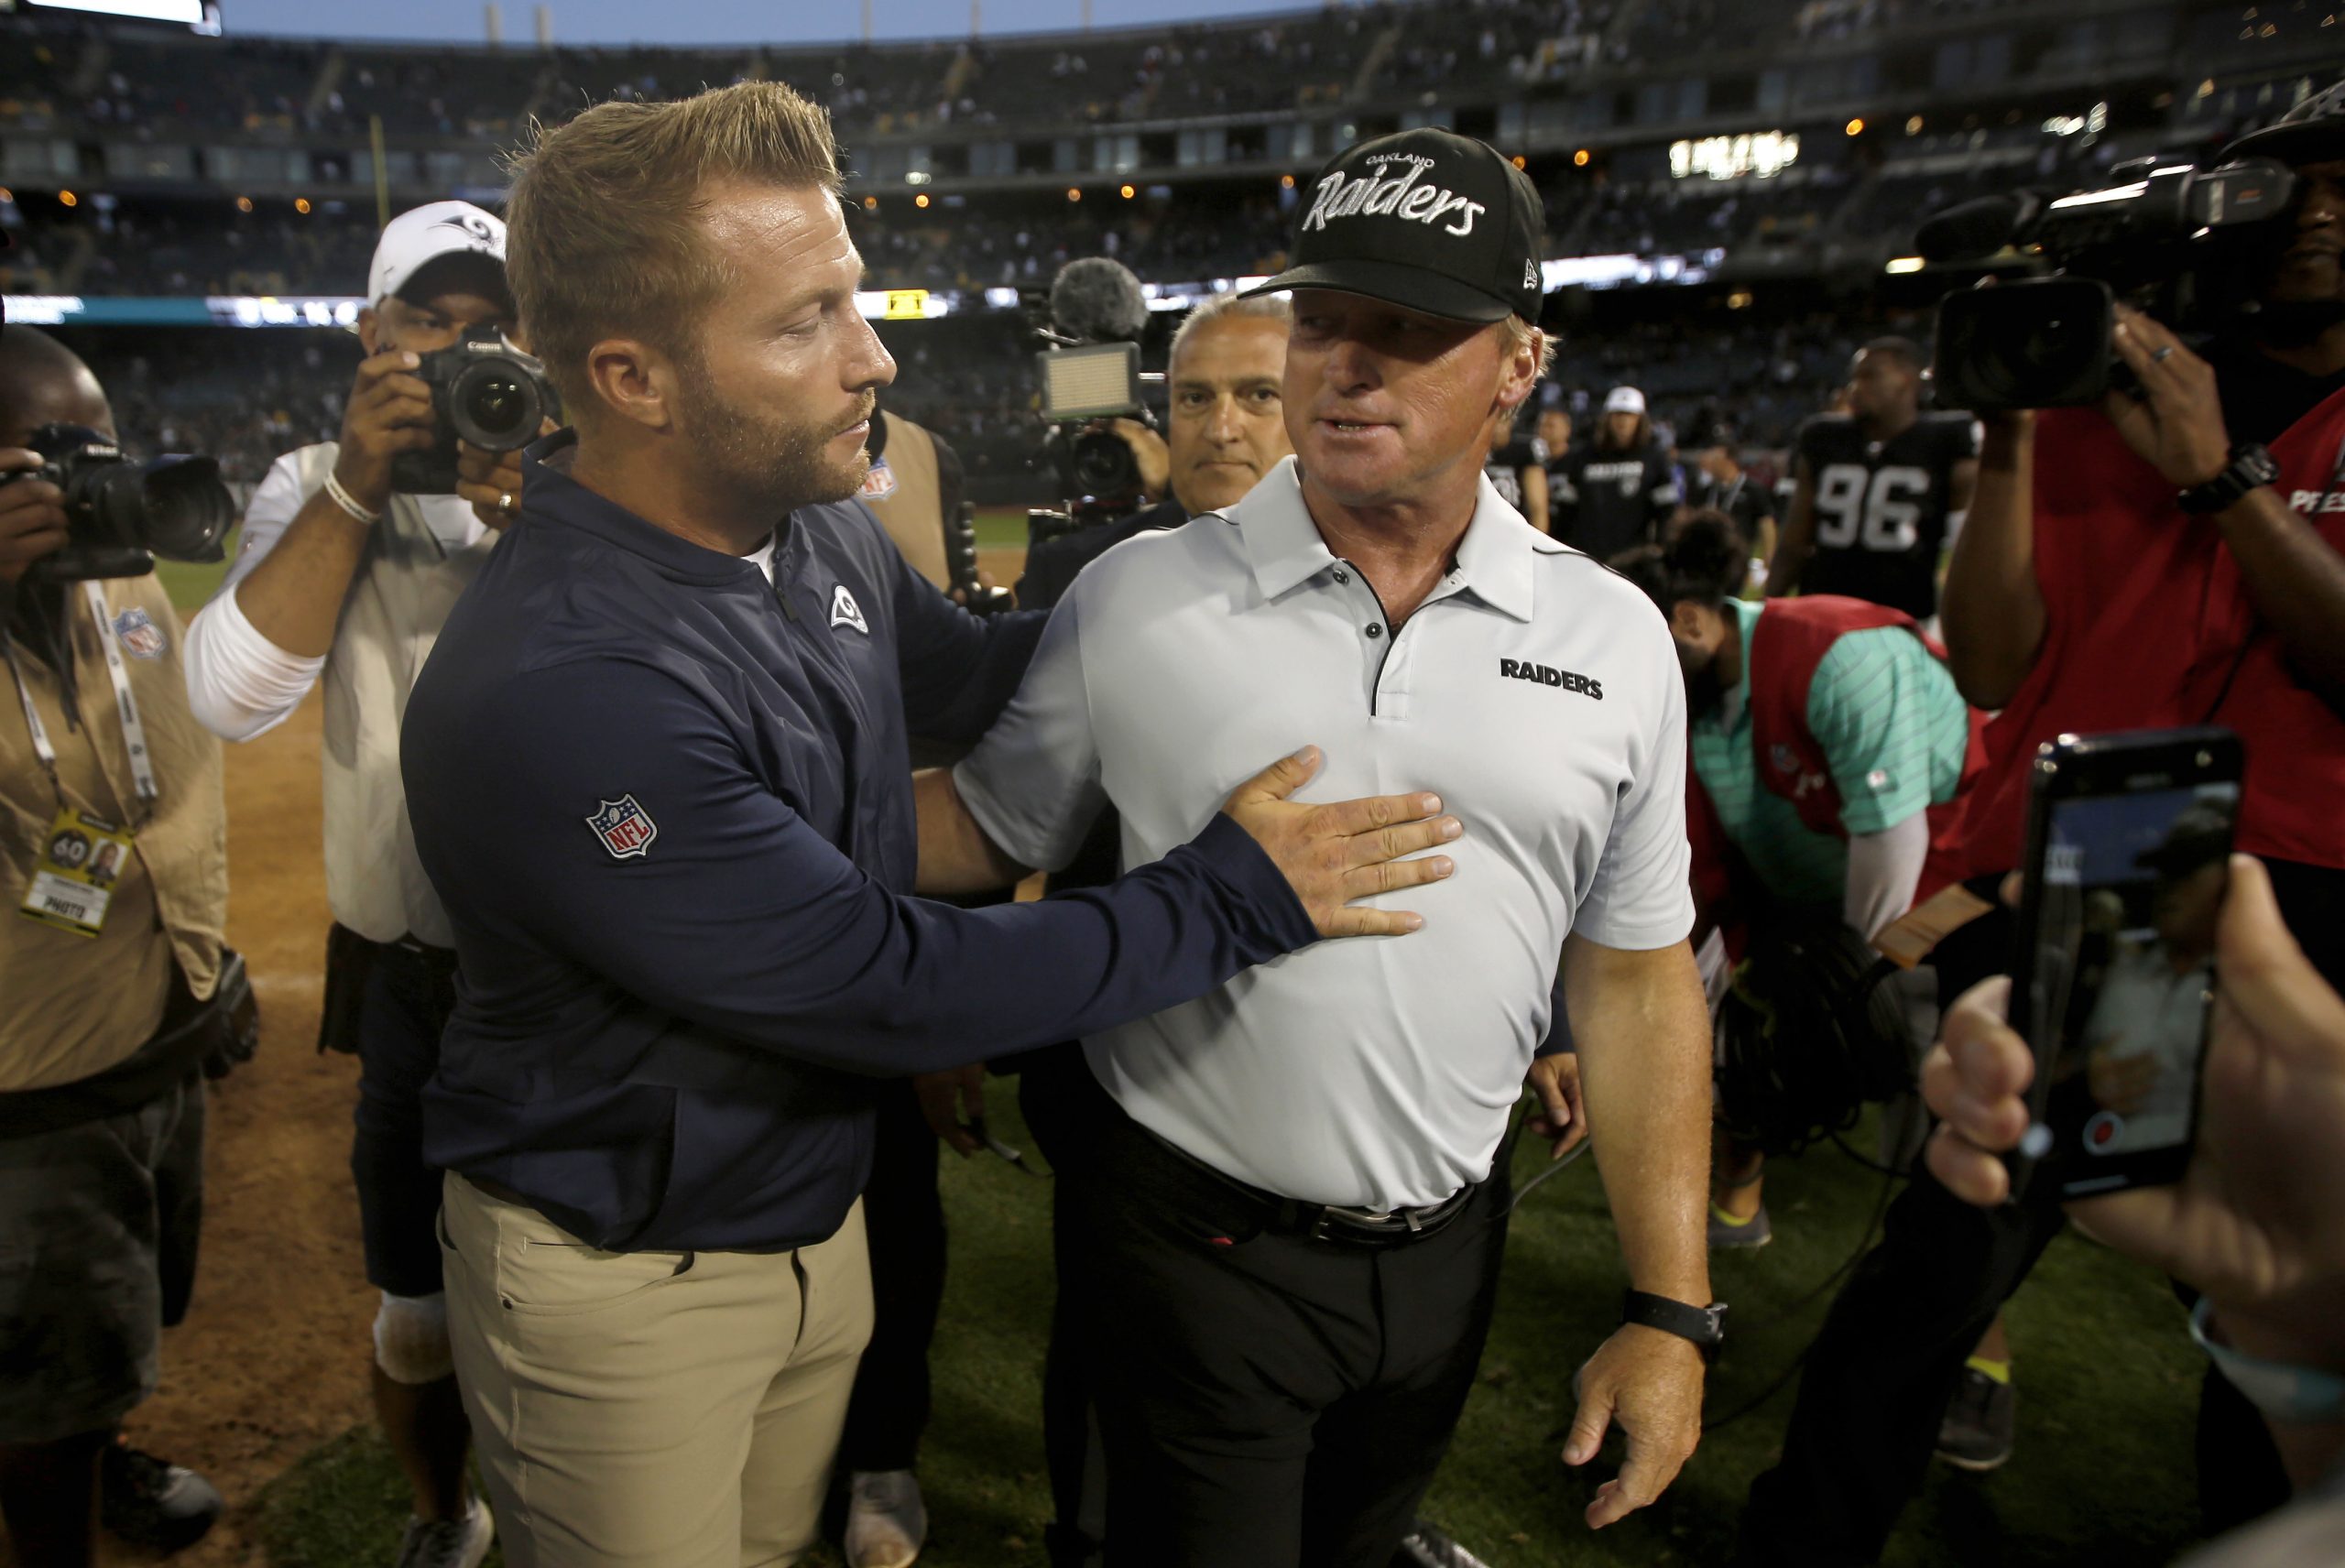 Many fans were pointing out a Sean McVay and Jon Gruden handshake moment during a chippy practice between the Raiders and Rams